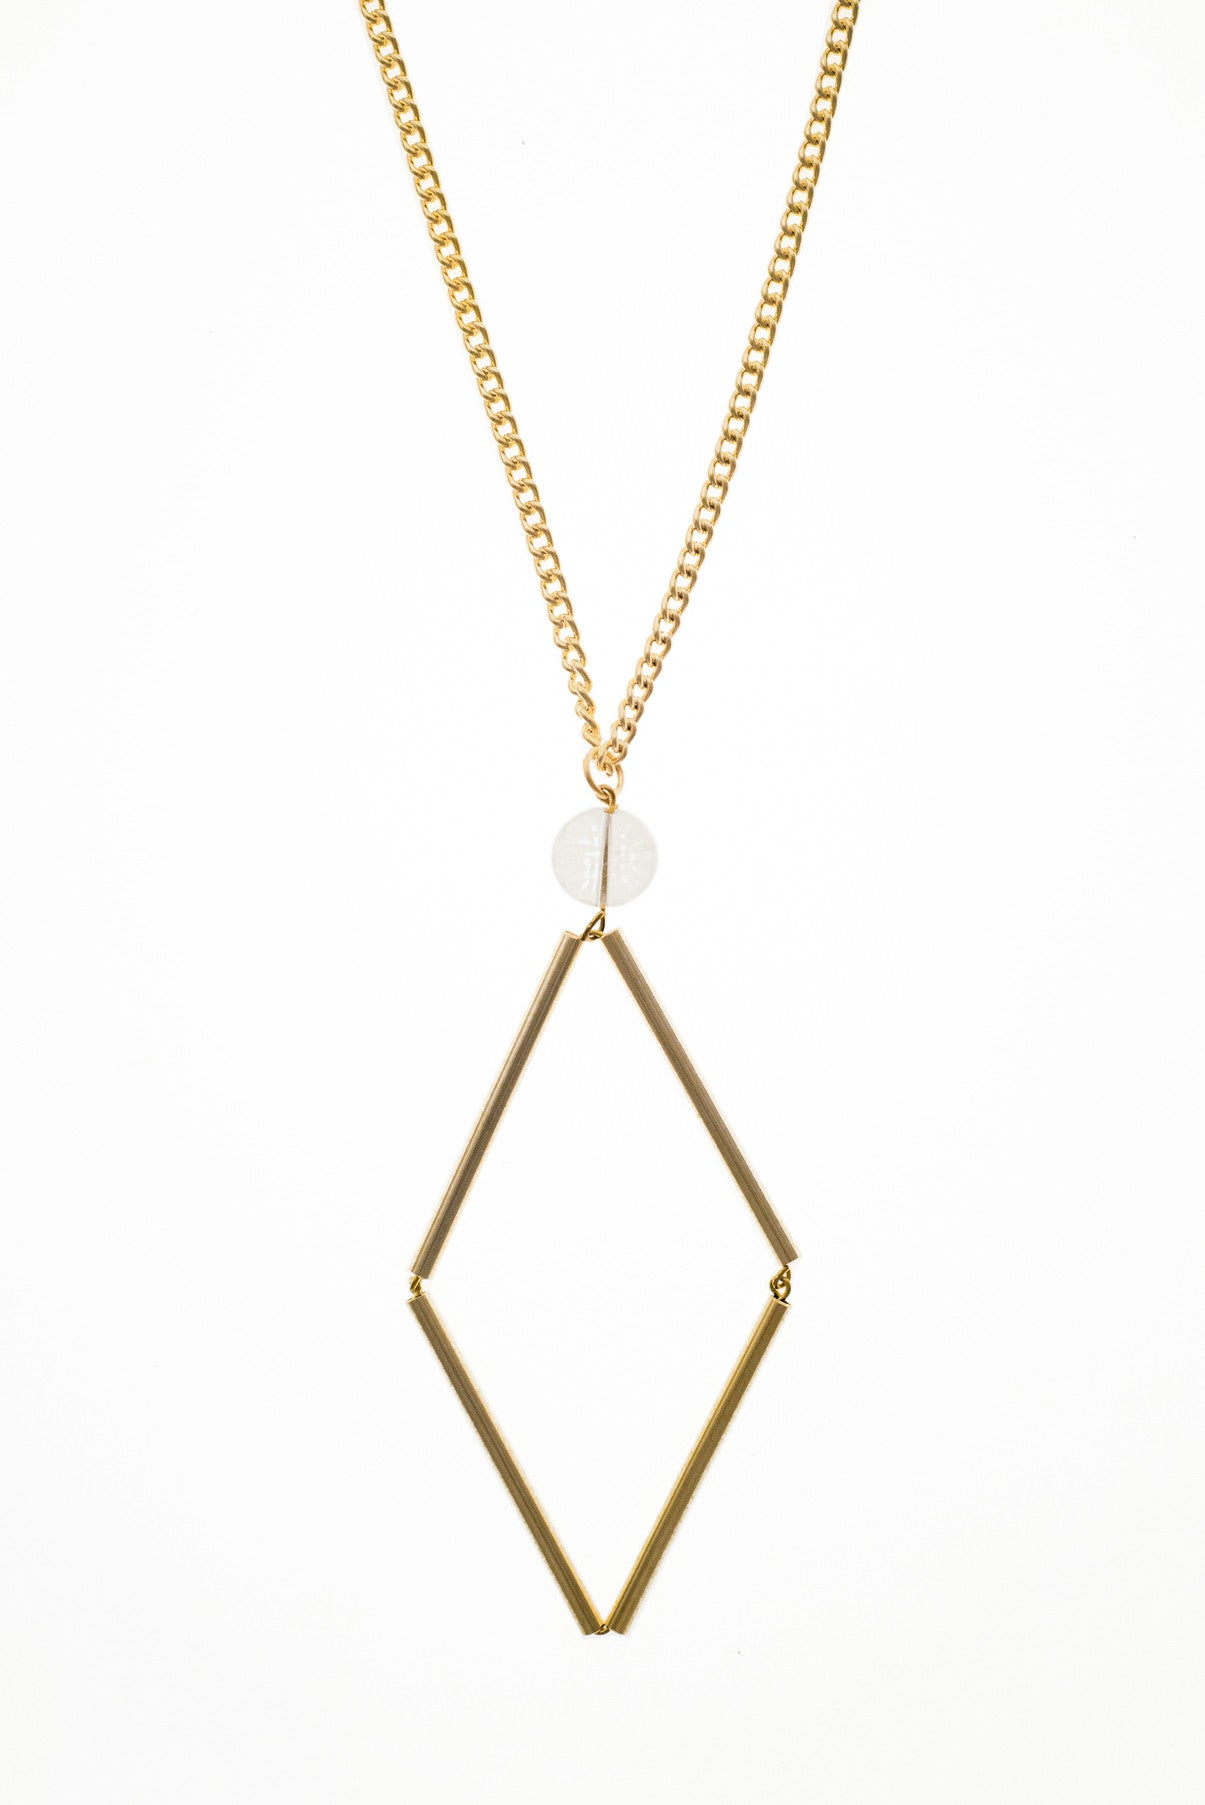 This Norma necklace features hand-cut, hand polished and galvanized brass and quartz.